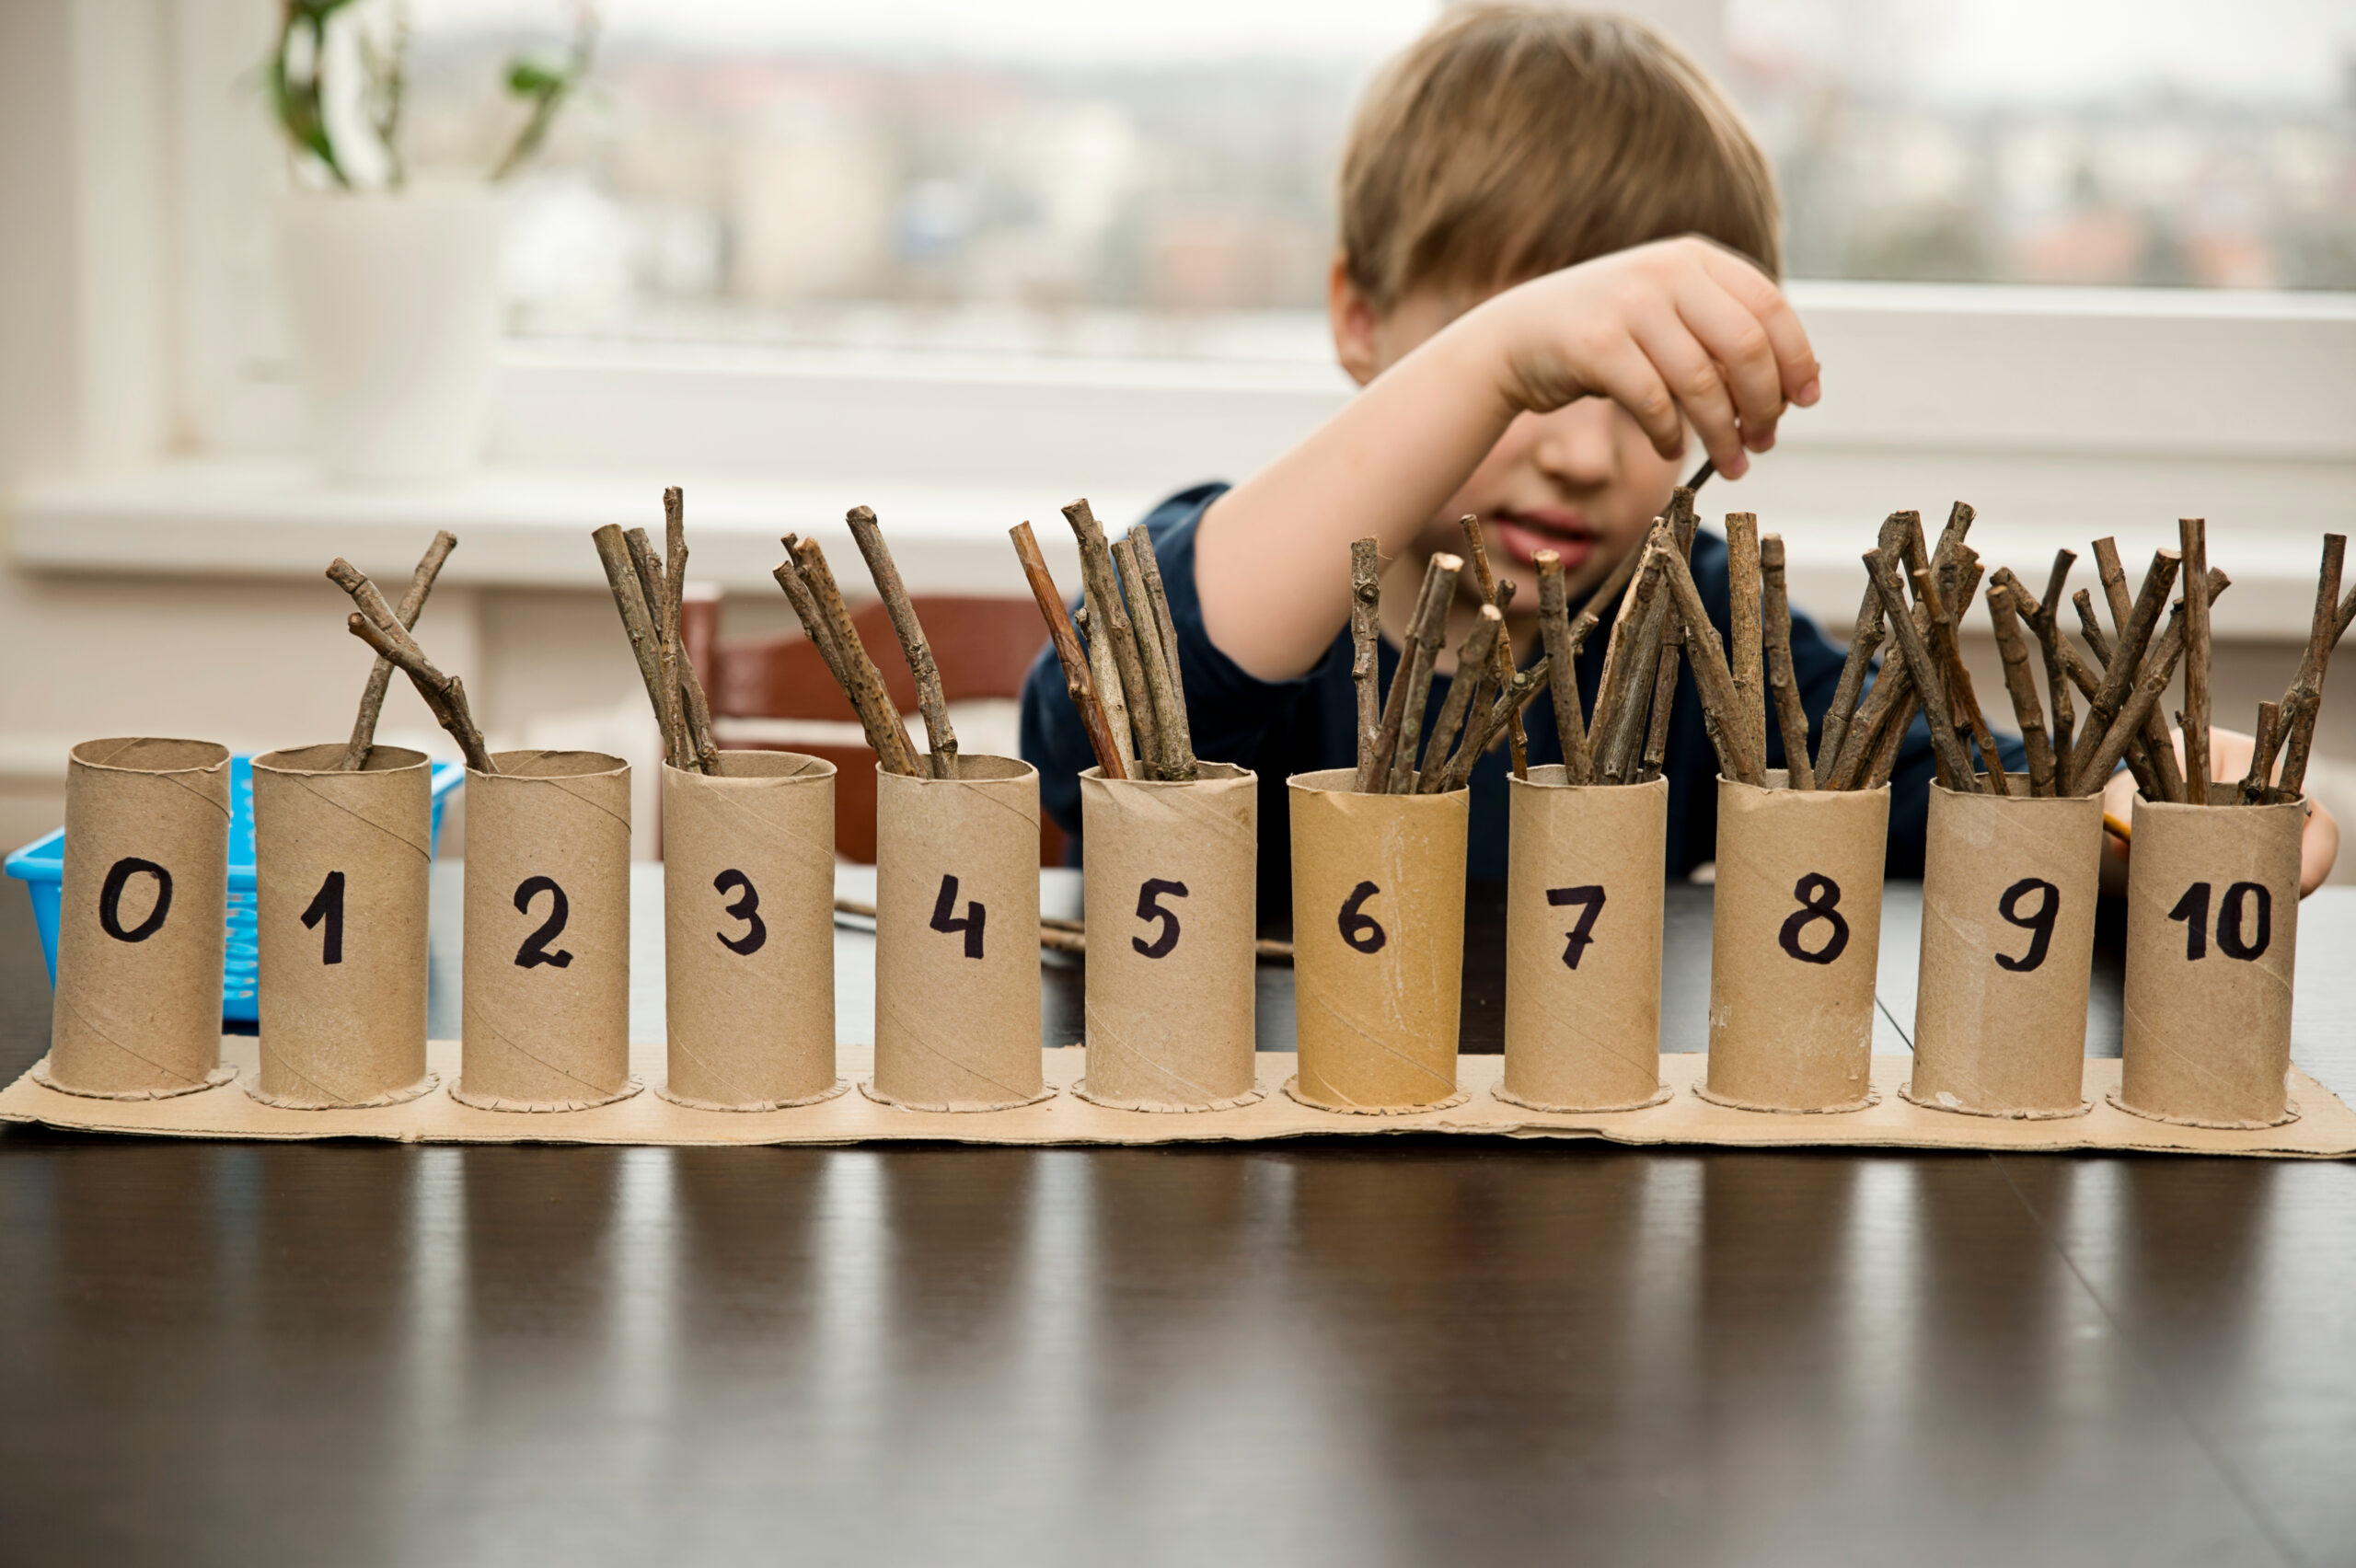 Hands-On Math Activities for Your First Grader